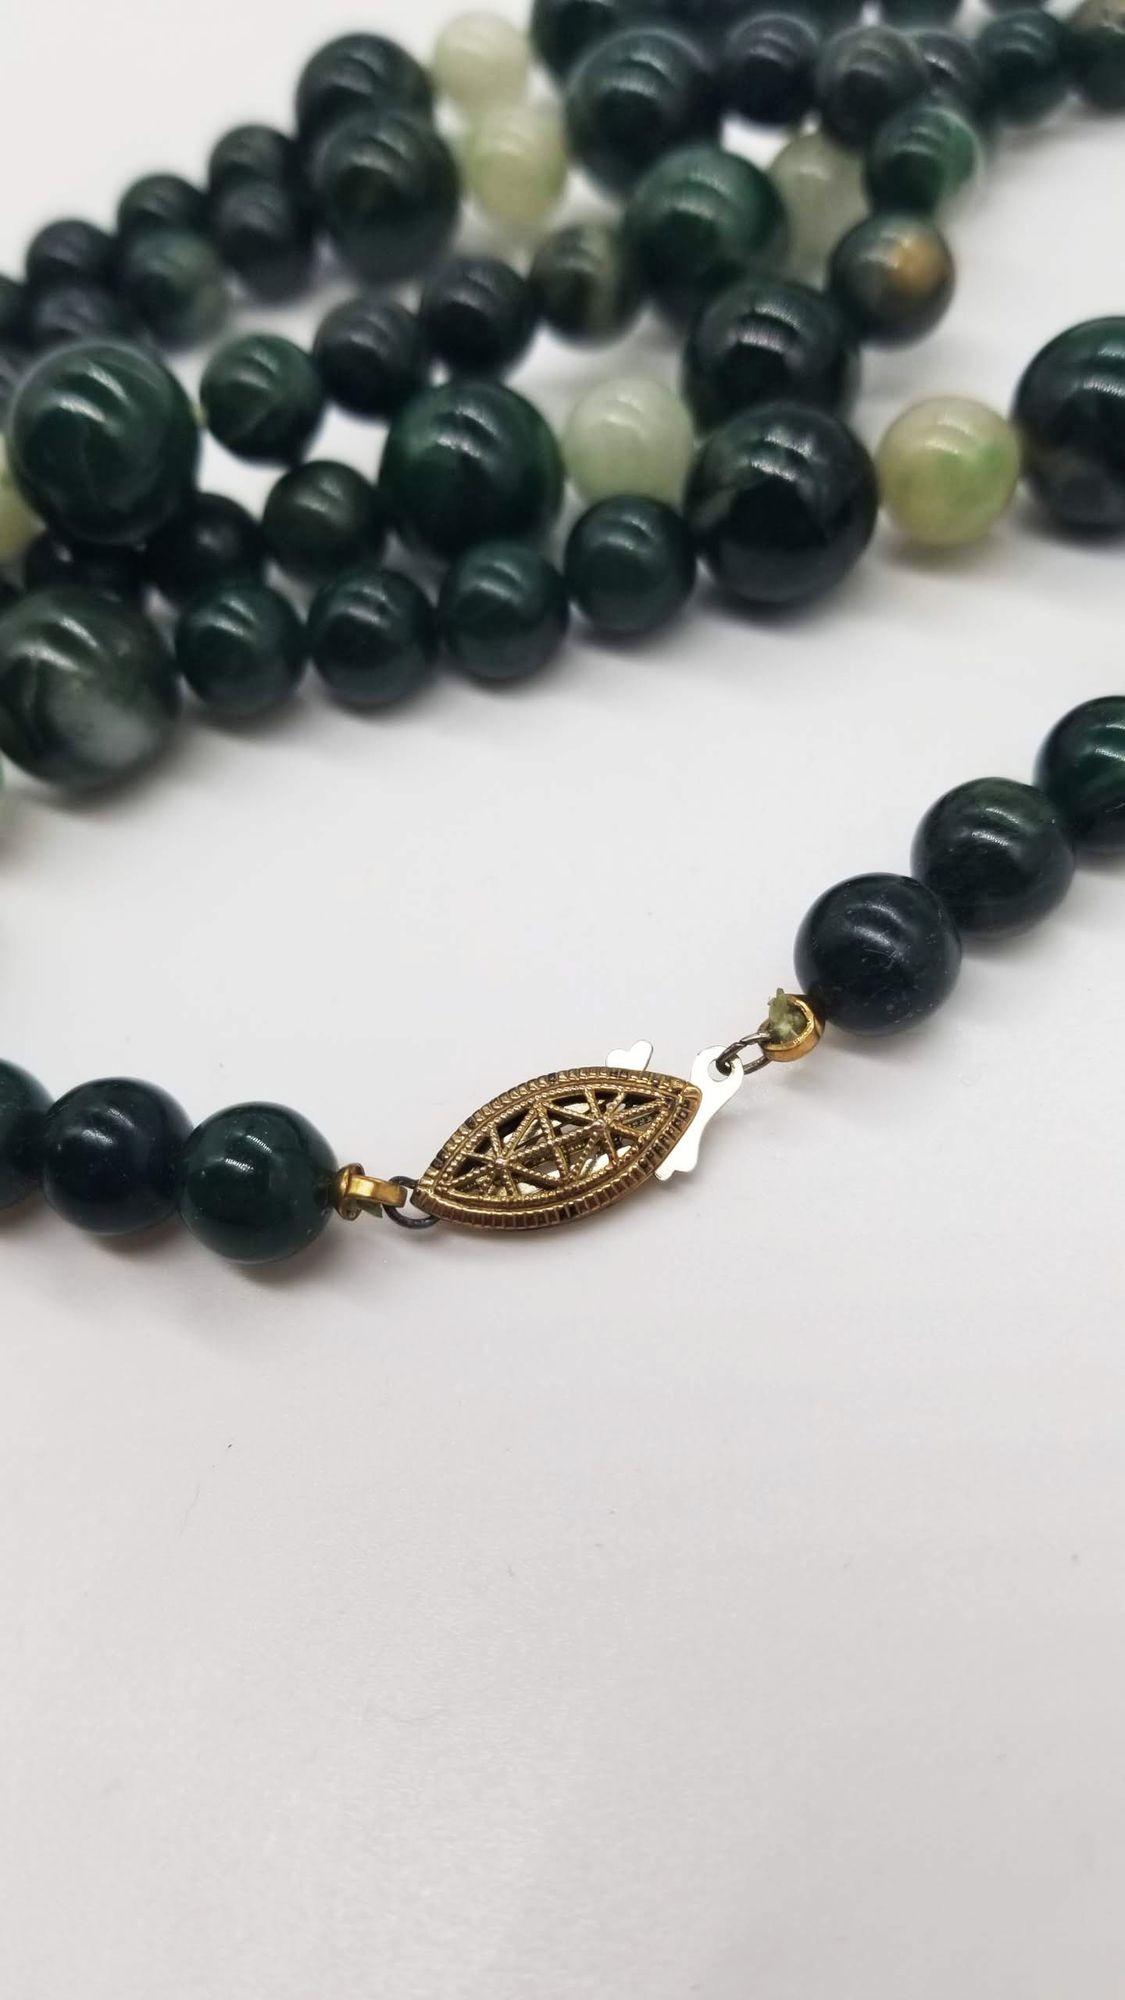 Vintage Nephrite Jade Beaded Necklace In Excellent Condition For Sale In Van Nuys, CA